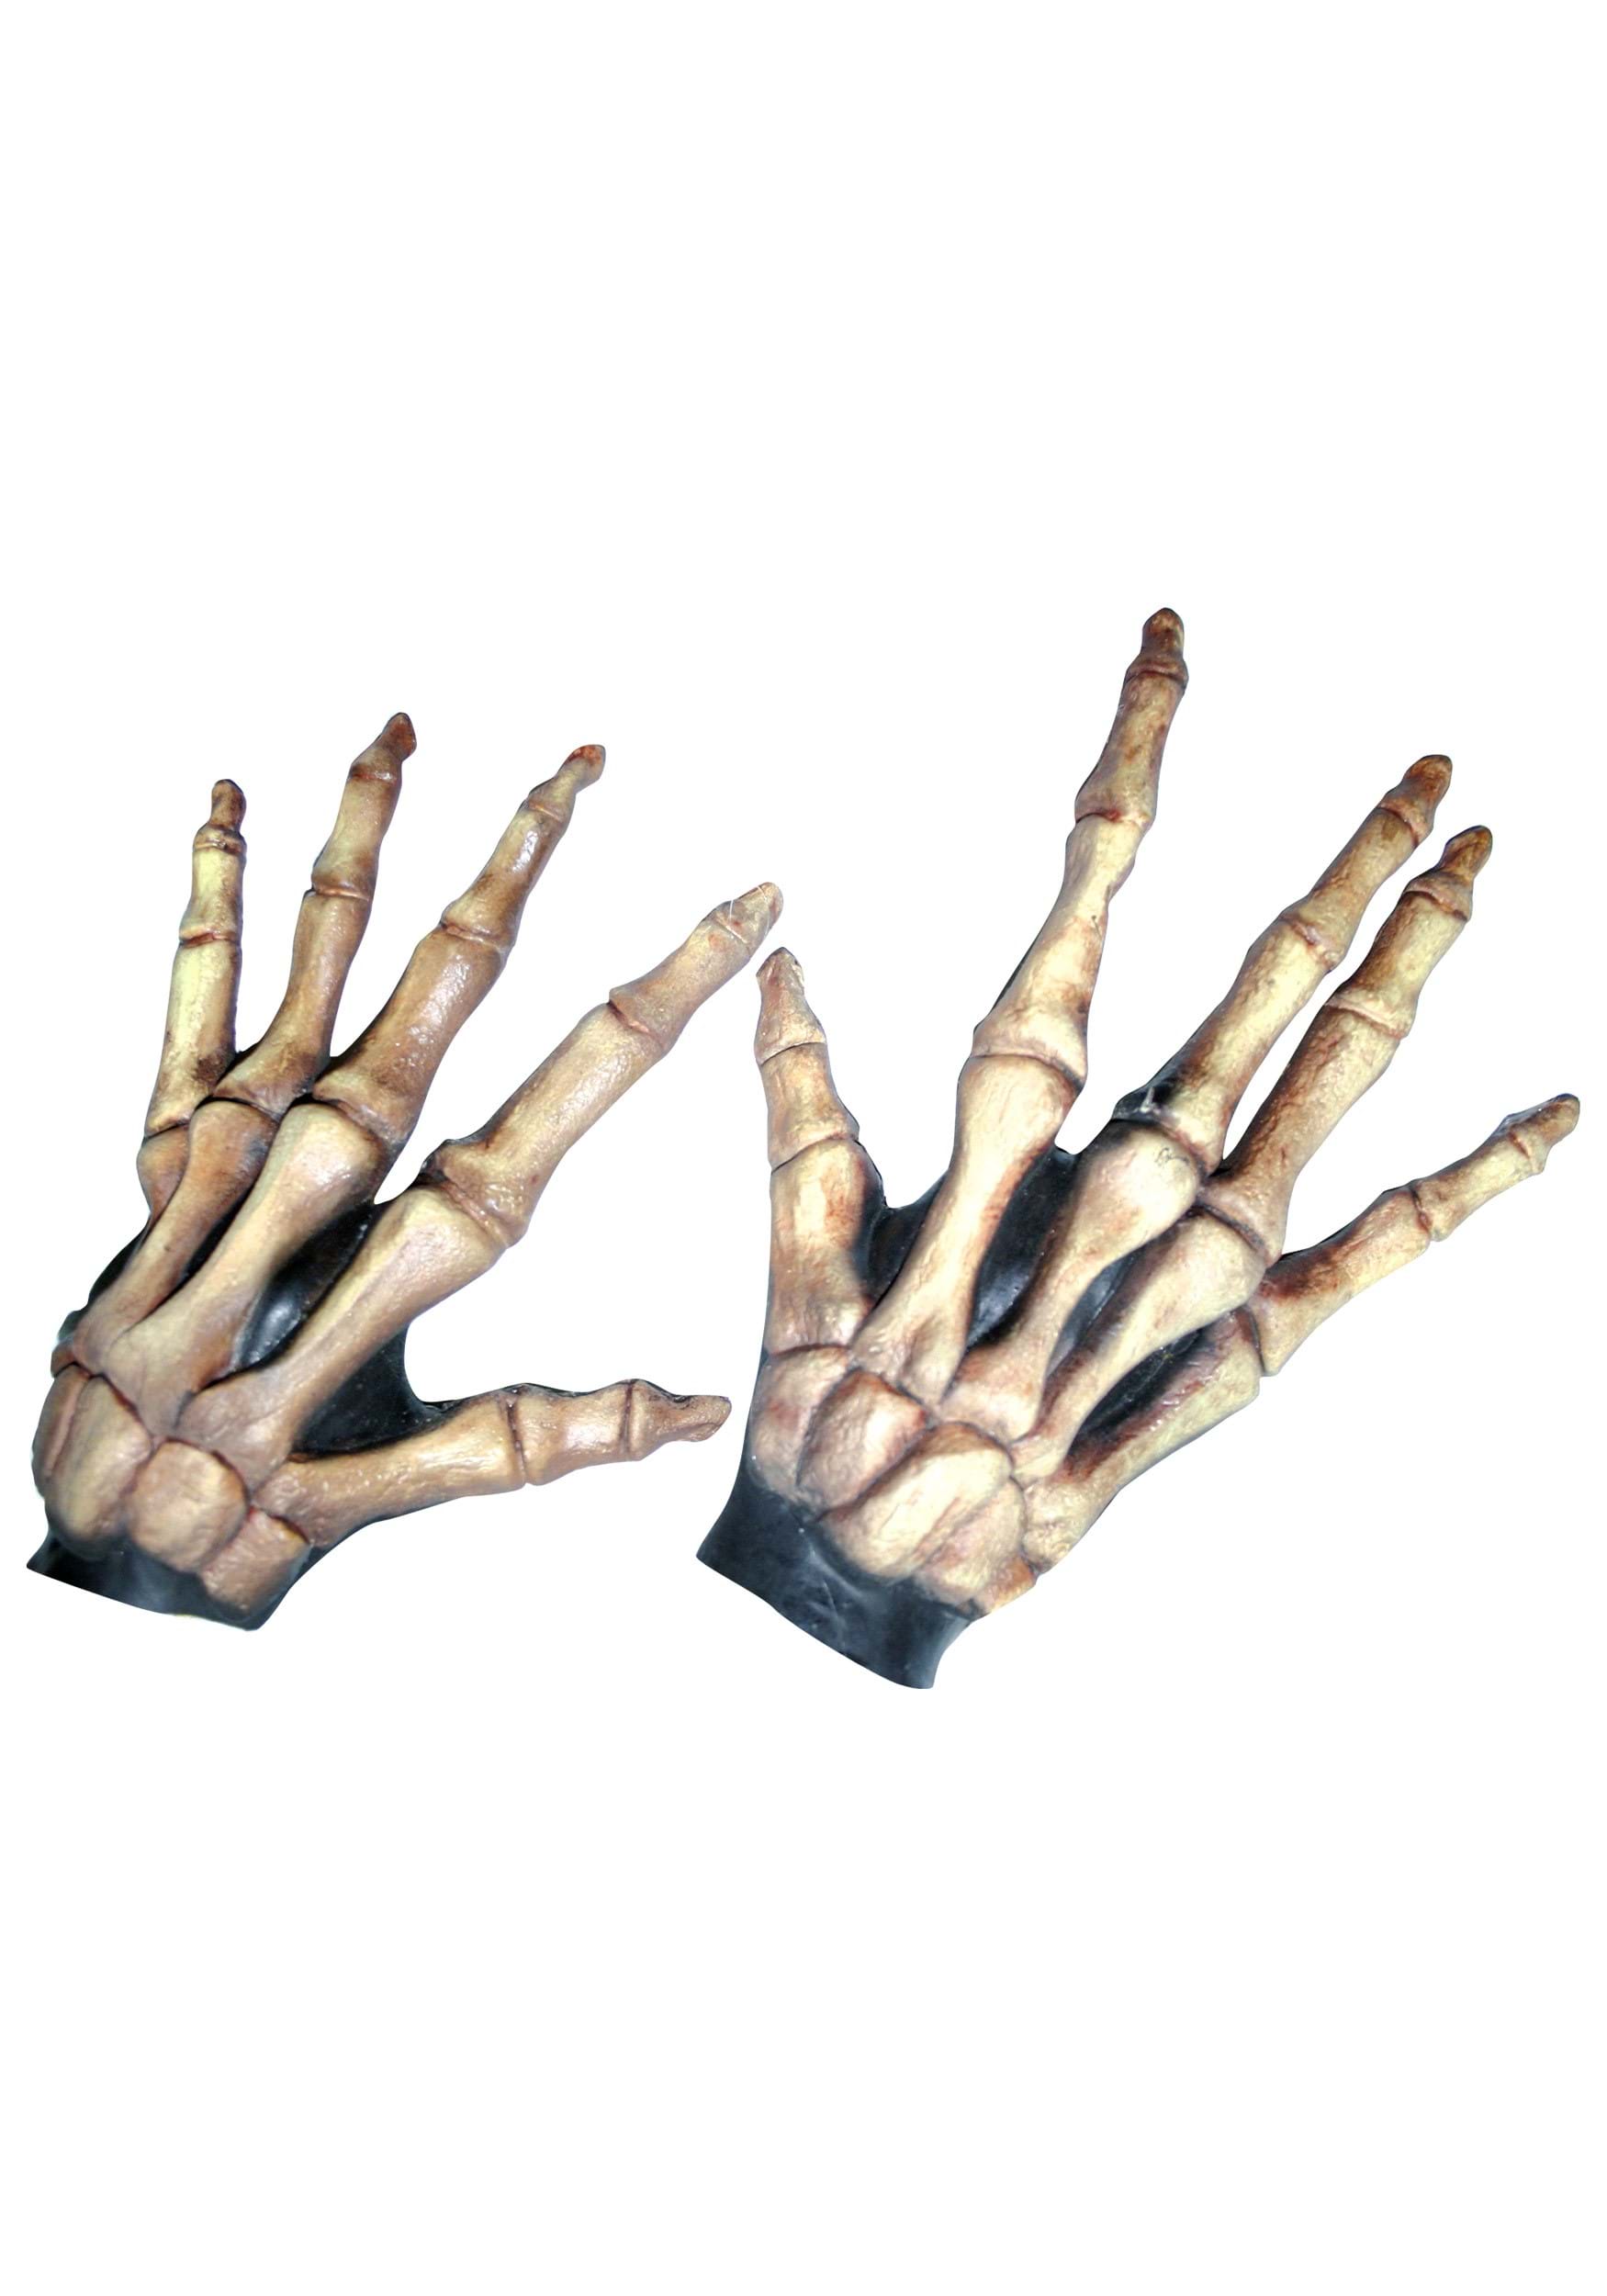 https://images.halloweencostumes.ca/products/73733/1-1/bone-colored-large-skeleton-hands.jpg